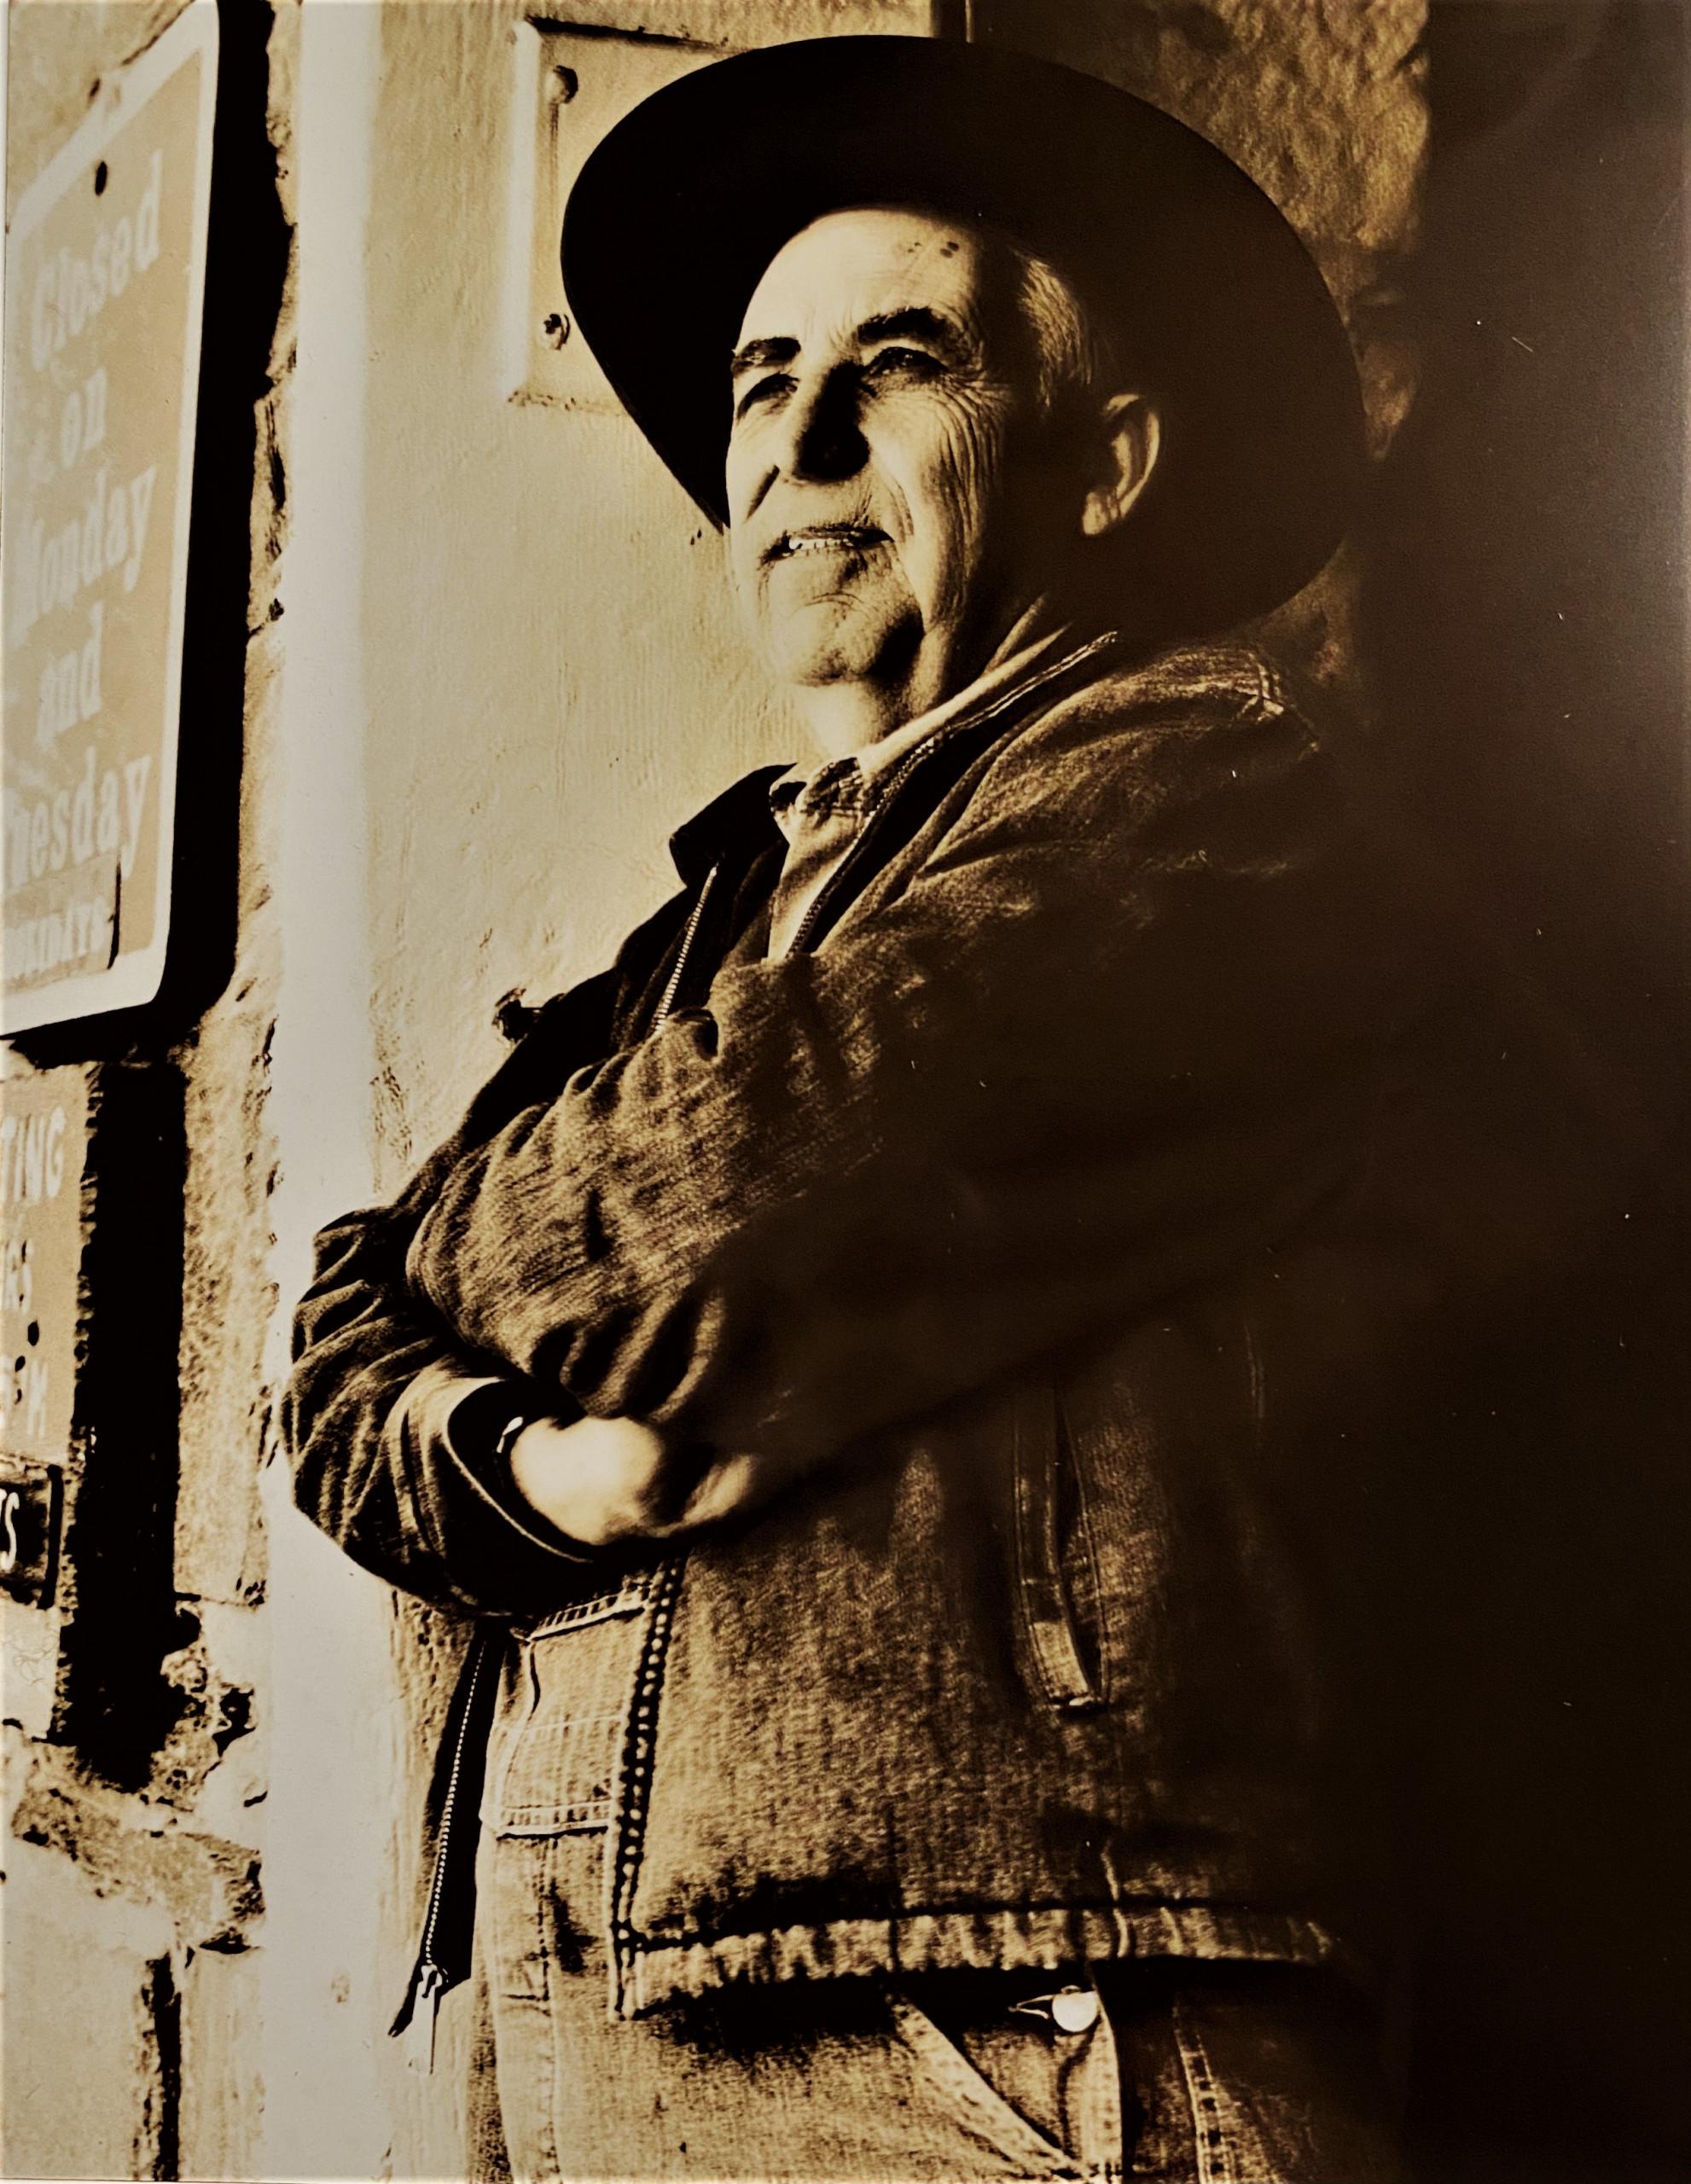 Black and white photograph of a man in brimmed hat and denim jacket leaning against the doorway of an old stone building